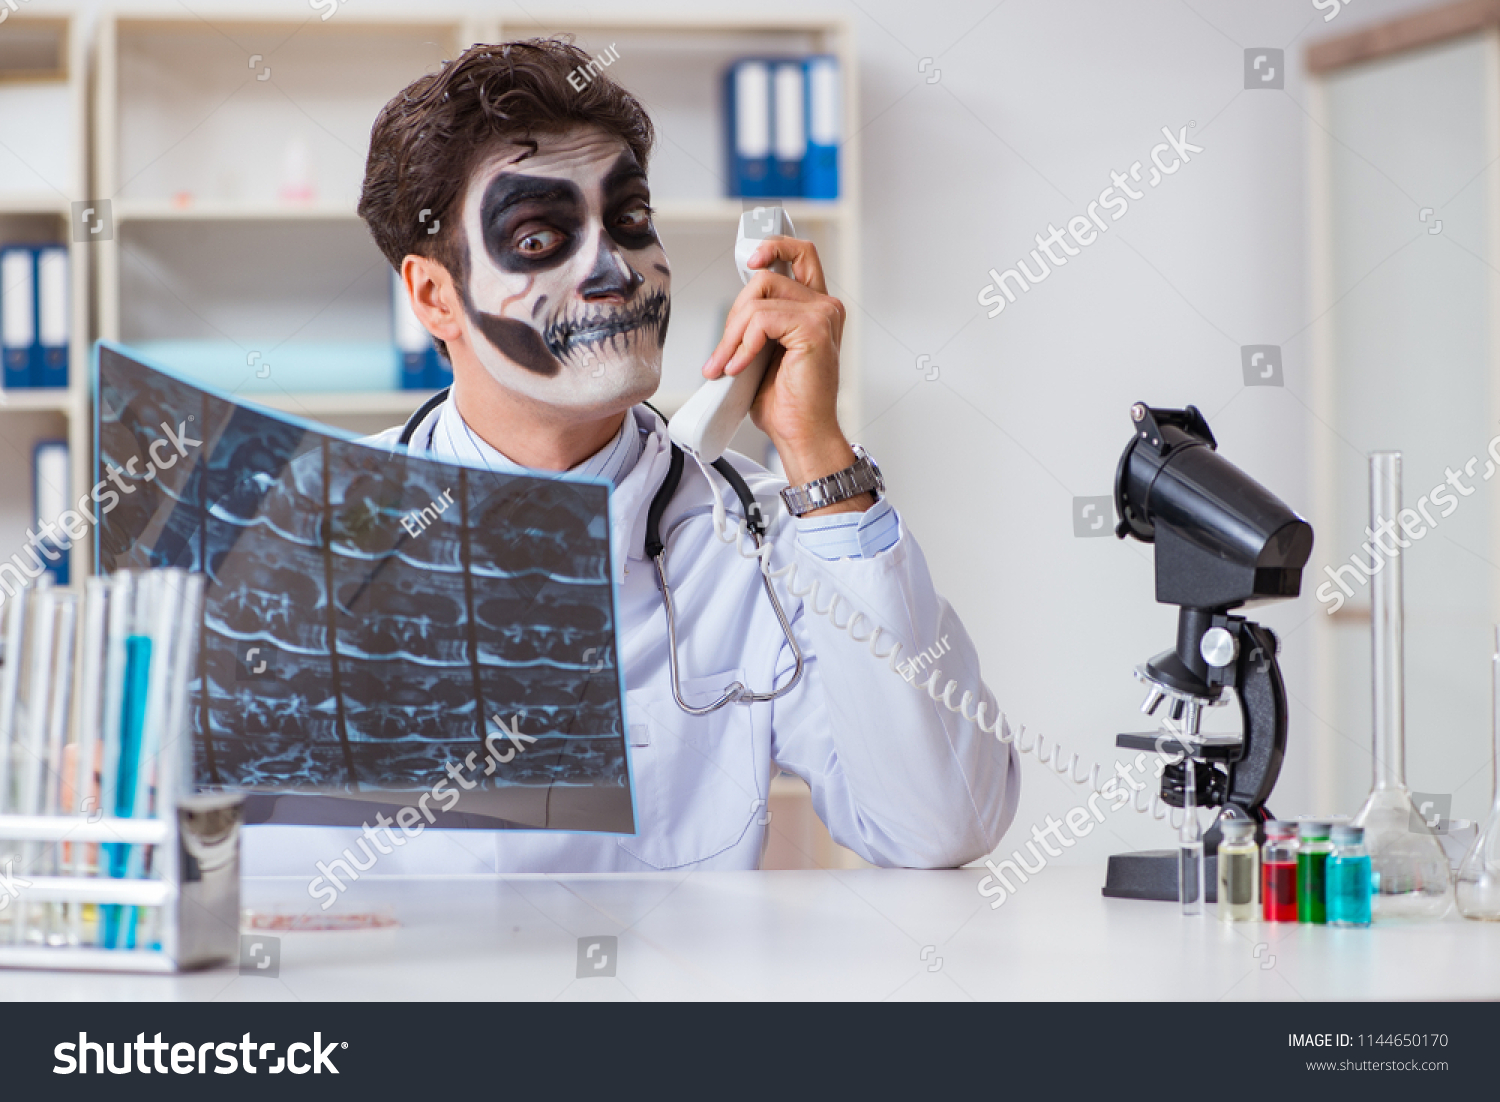 Scary monster doctor working in lab #1144650170